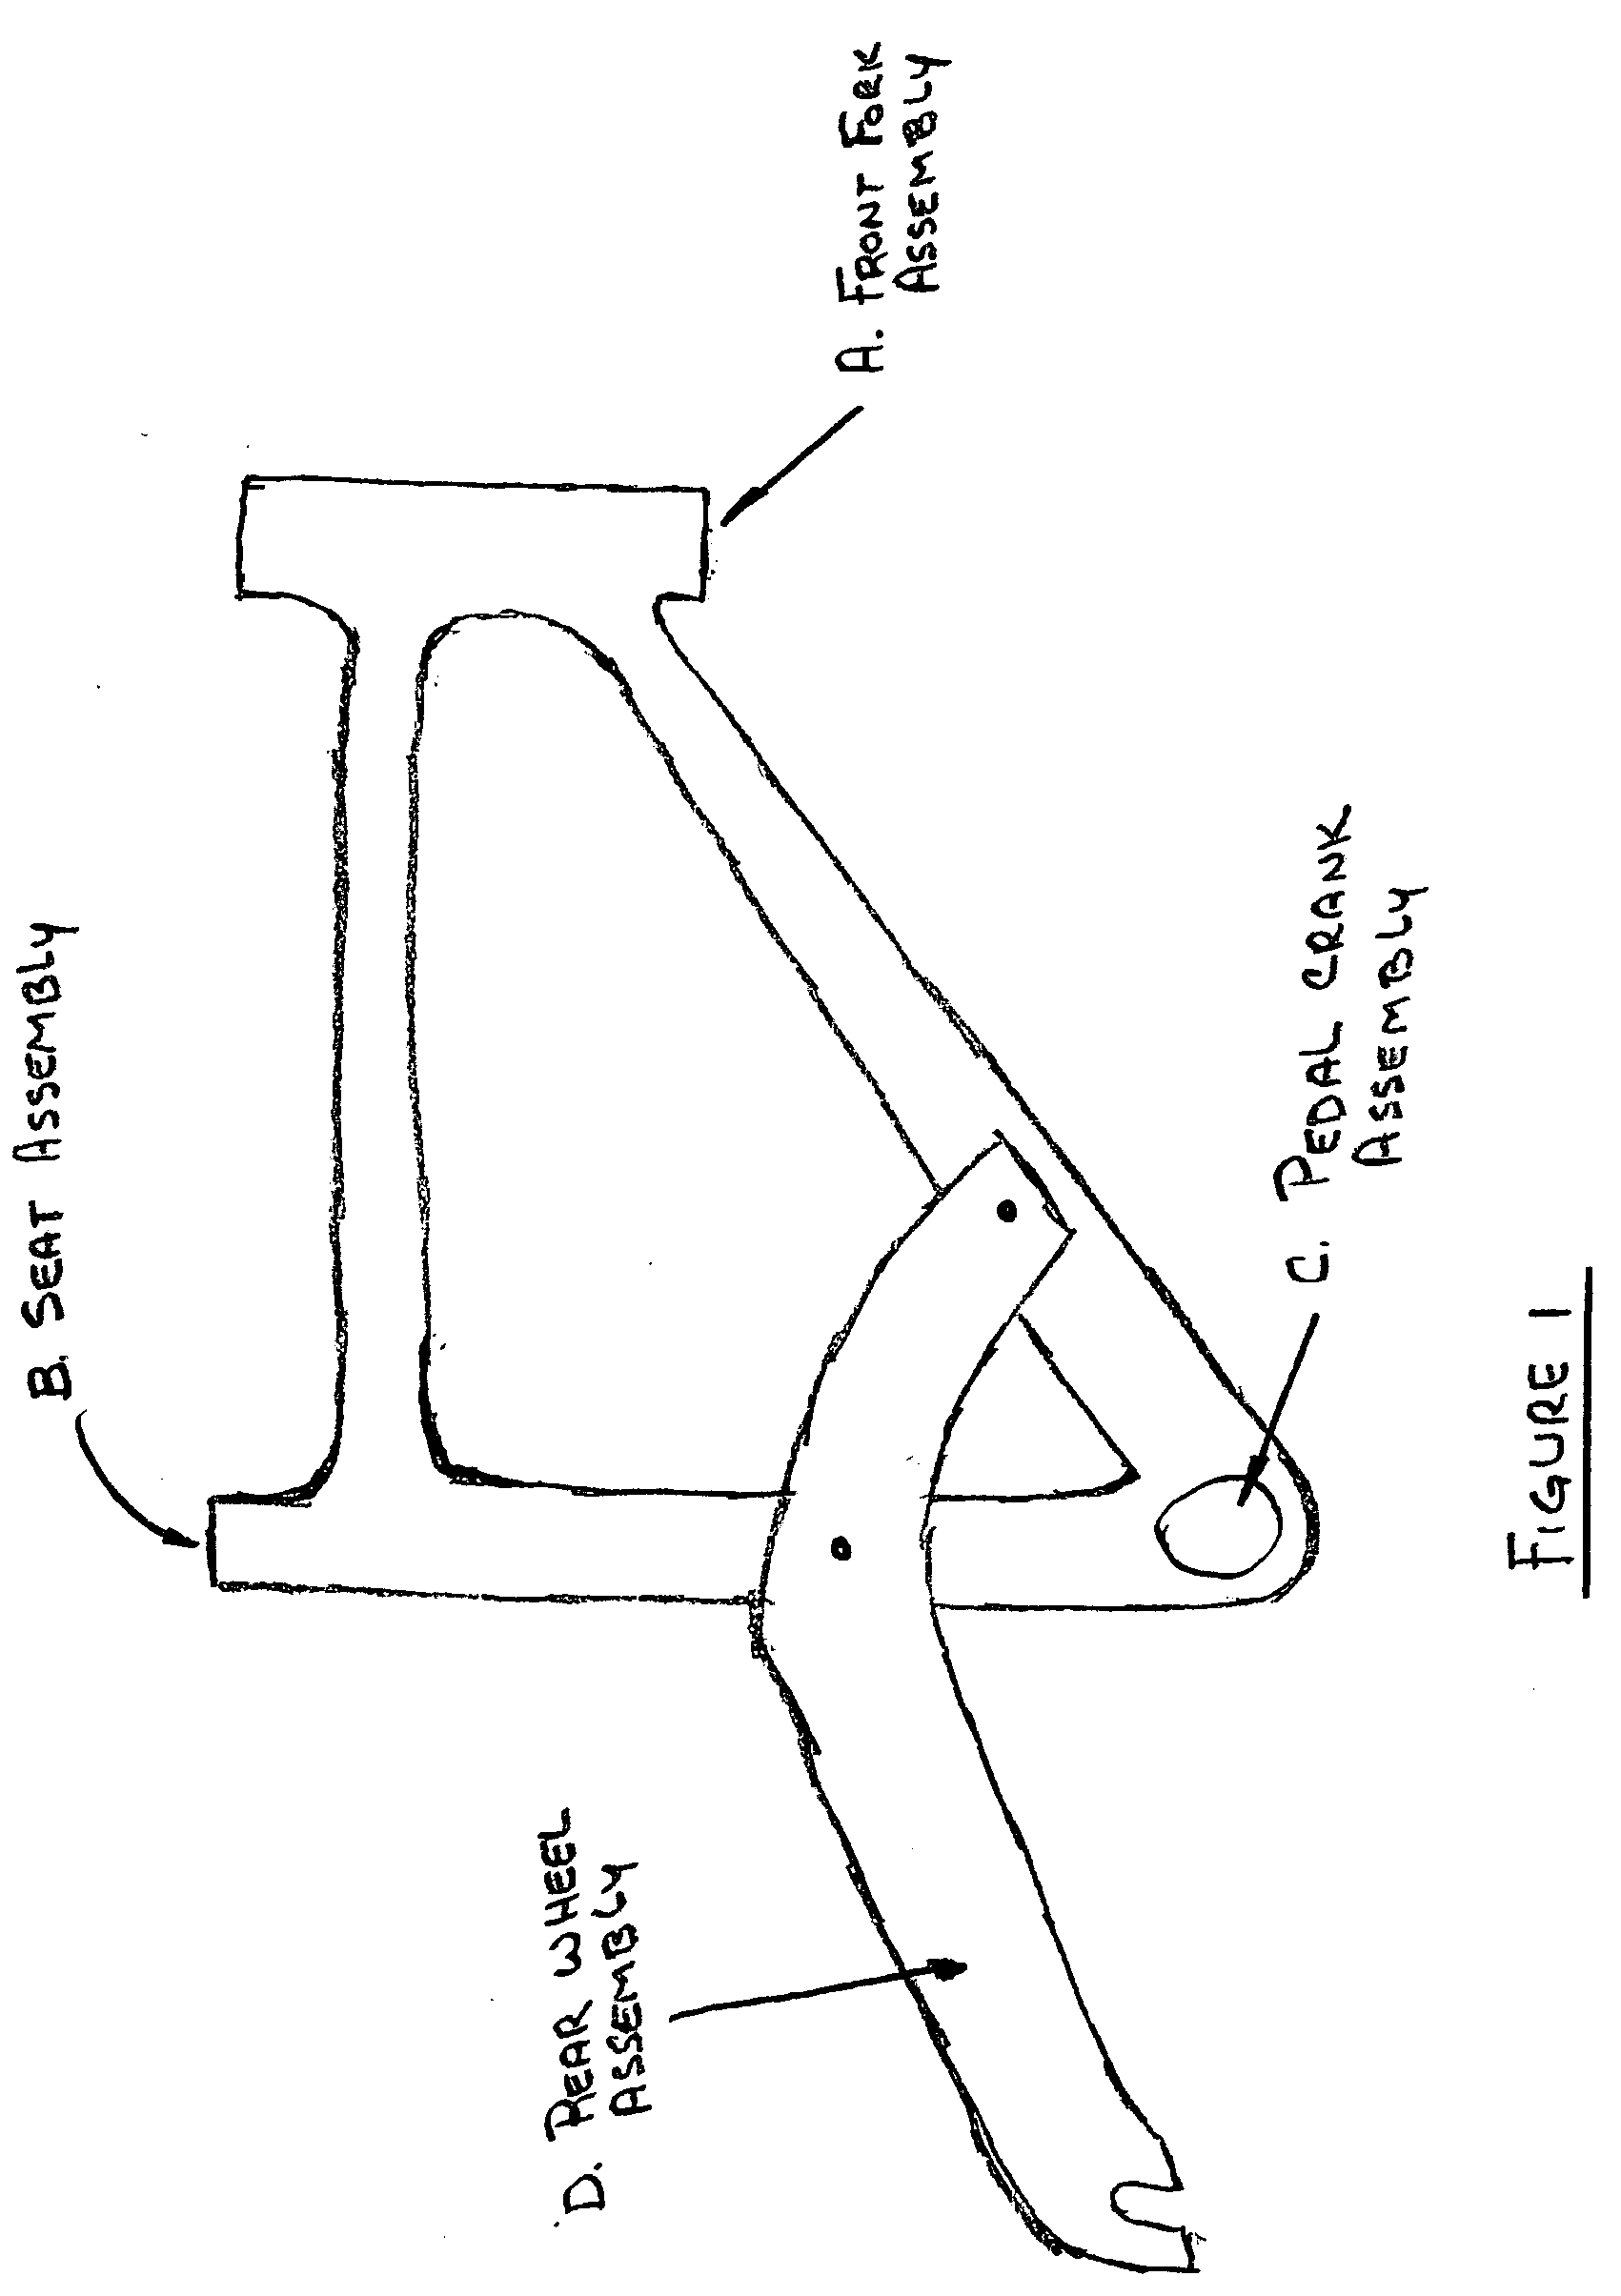 Article of manufacture for a hollow one piece plastic injection molded bicycle frame and process for making same